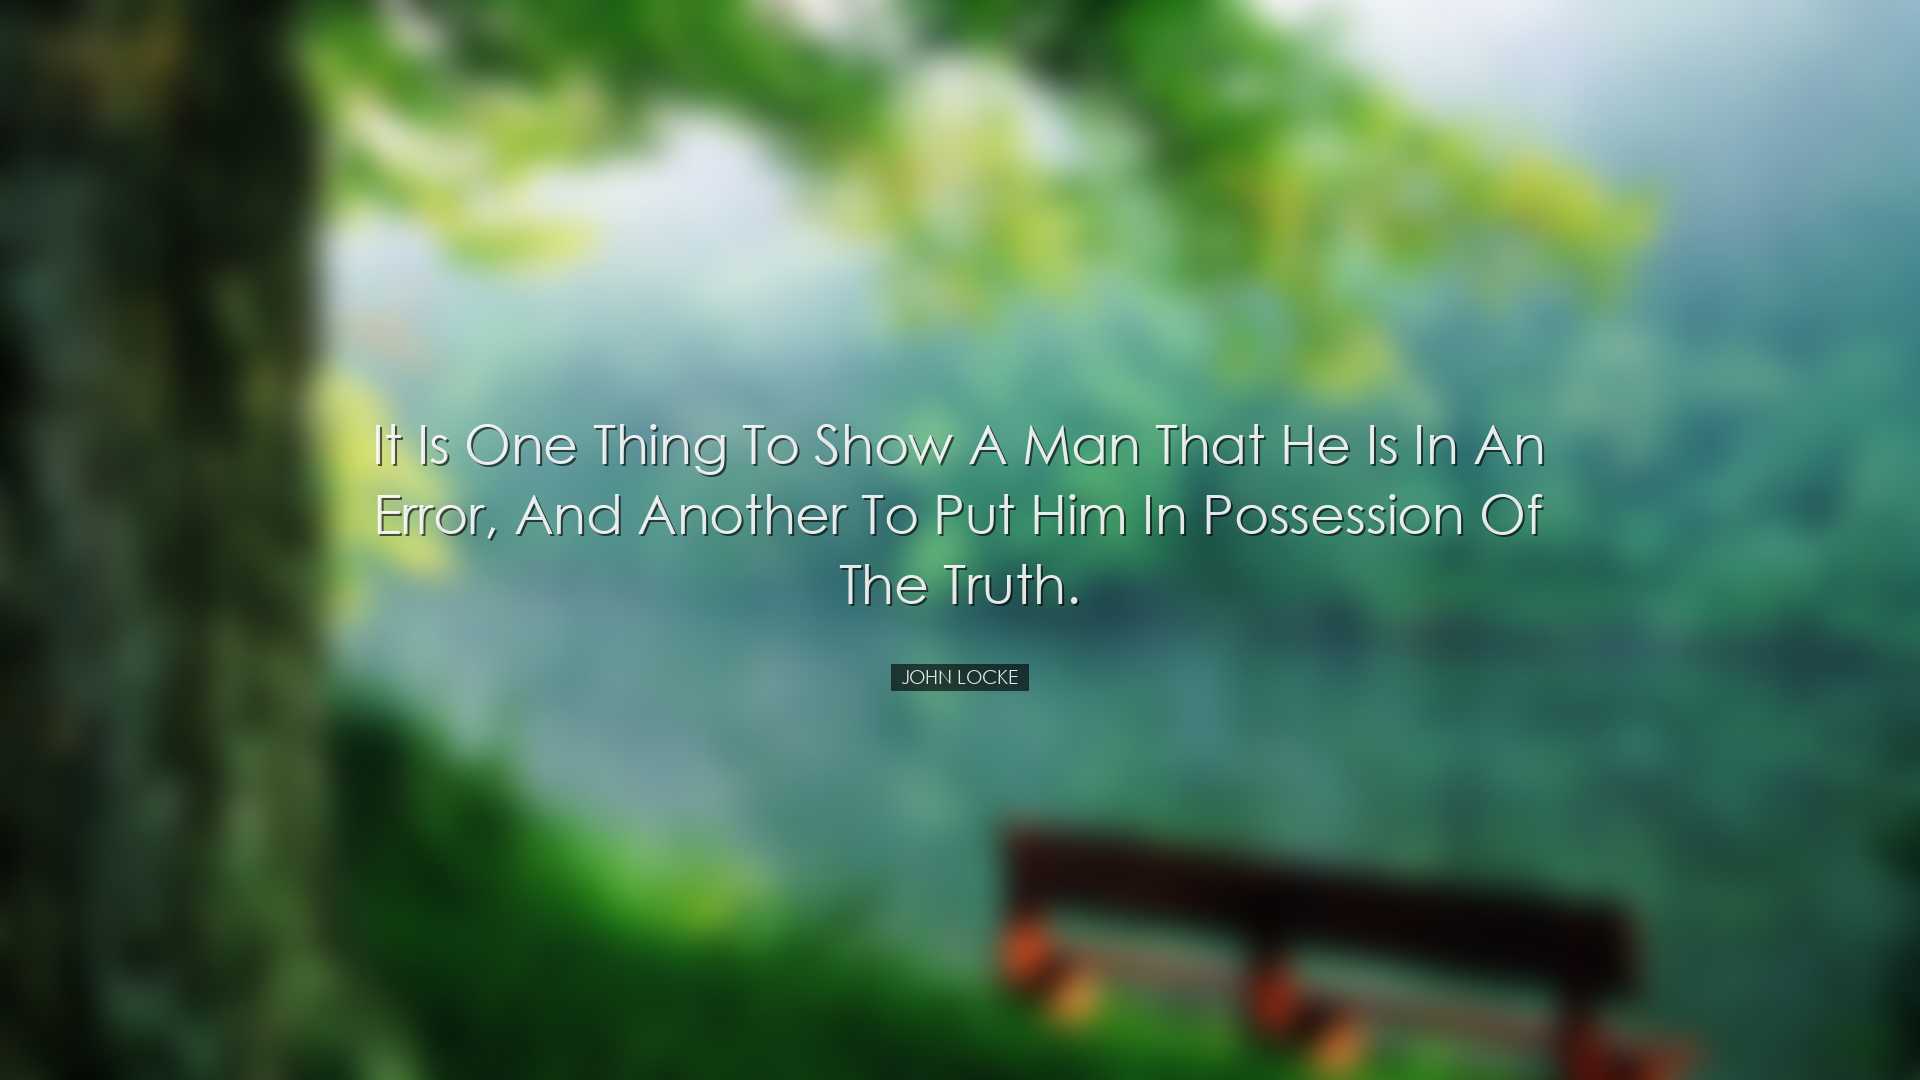 It is one thing to show a man that he is in an error, and another